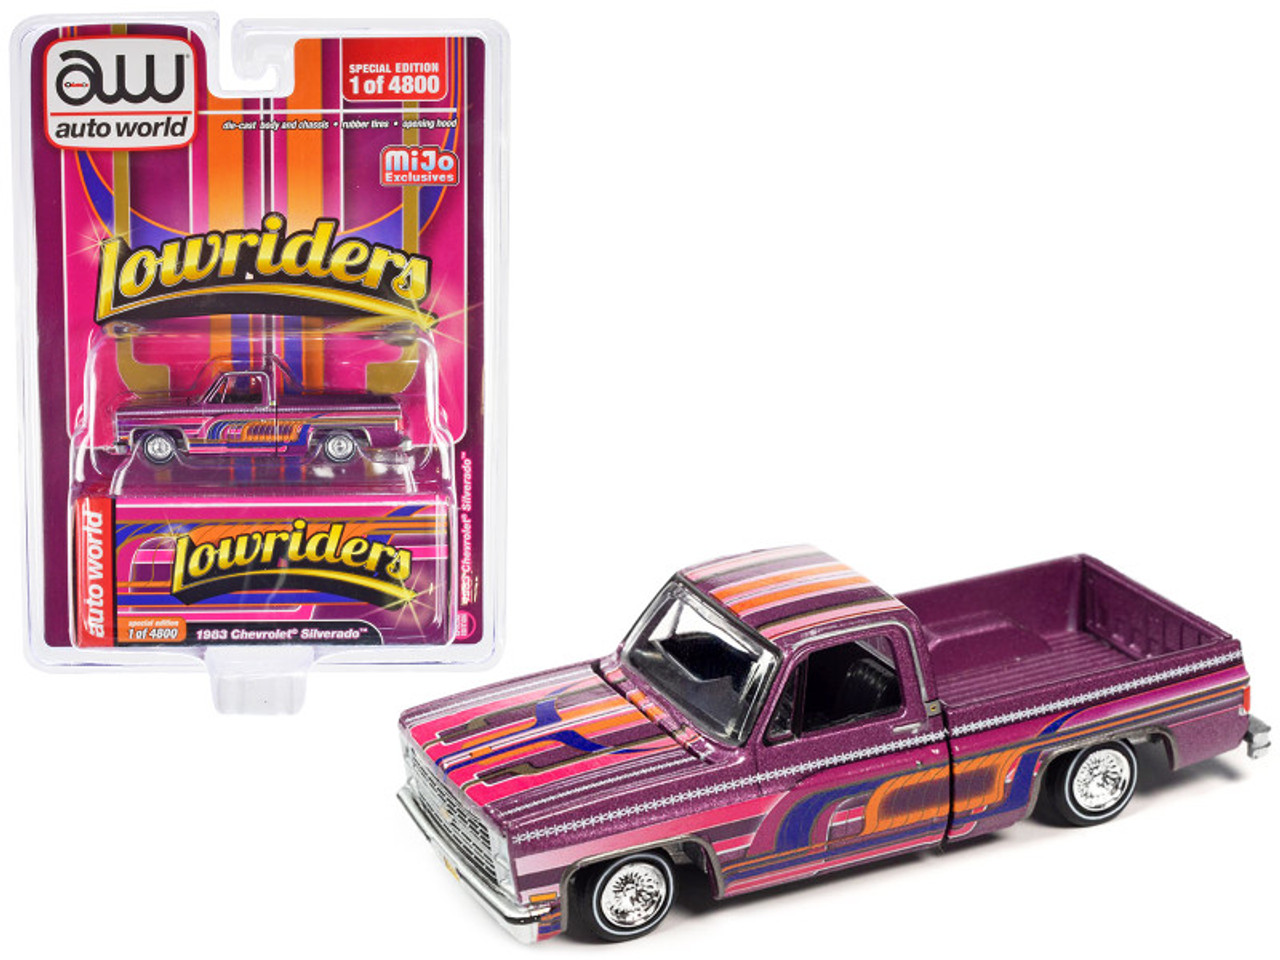 1983 Chevrolet Silverado Pickup Truck Purple Metallic with Graphics "Lowriders" Limited Edition to 4800 pieces Worldwide 1/64 Diecast Model Car by Auto World